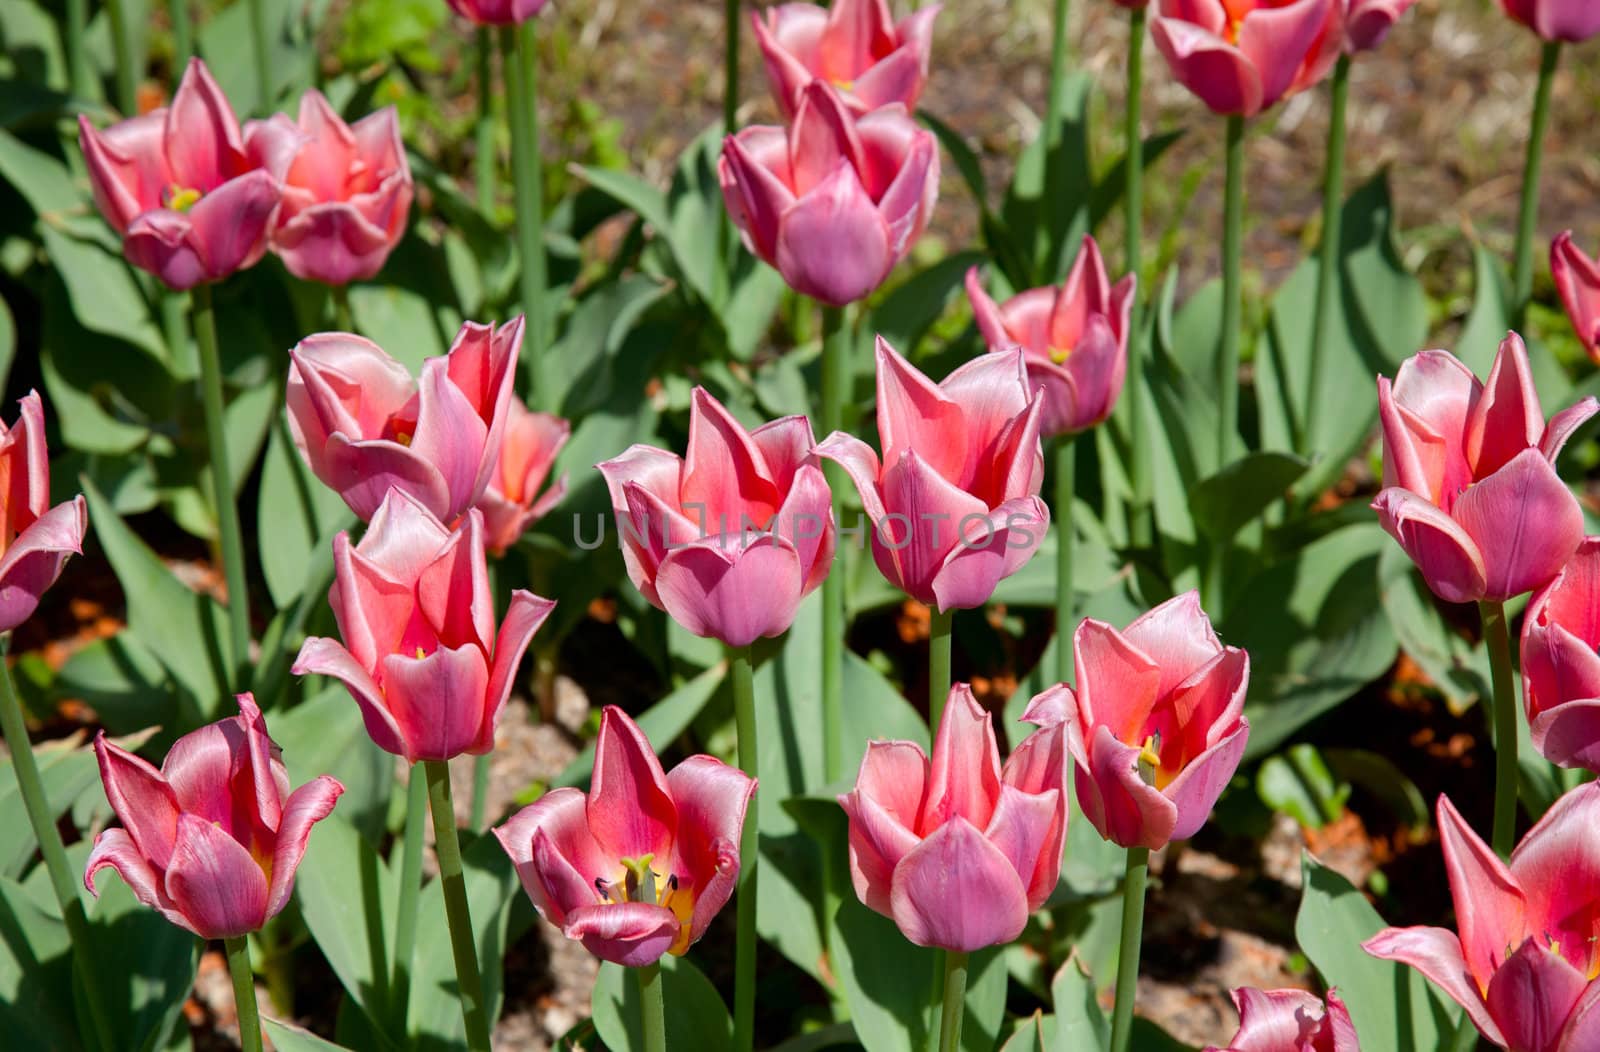 Flower bed with beautiful pink tulips